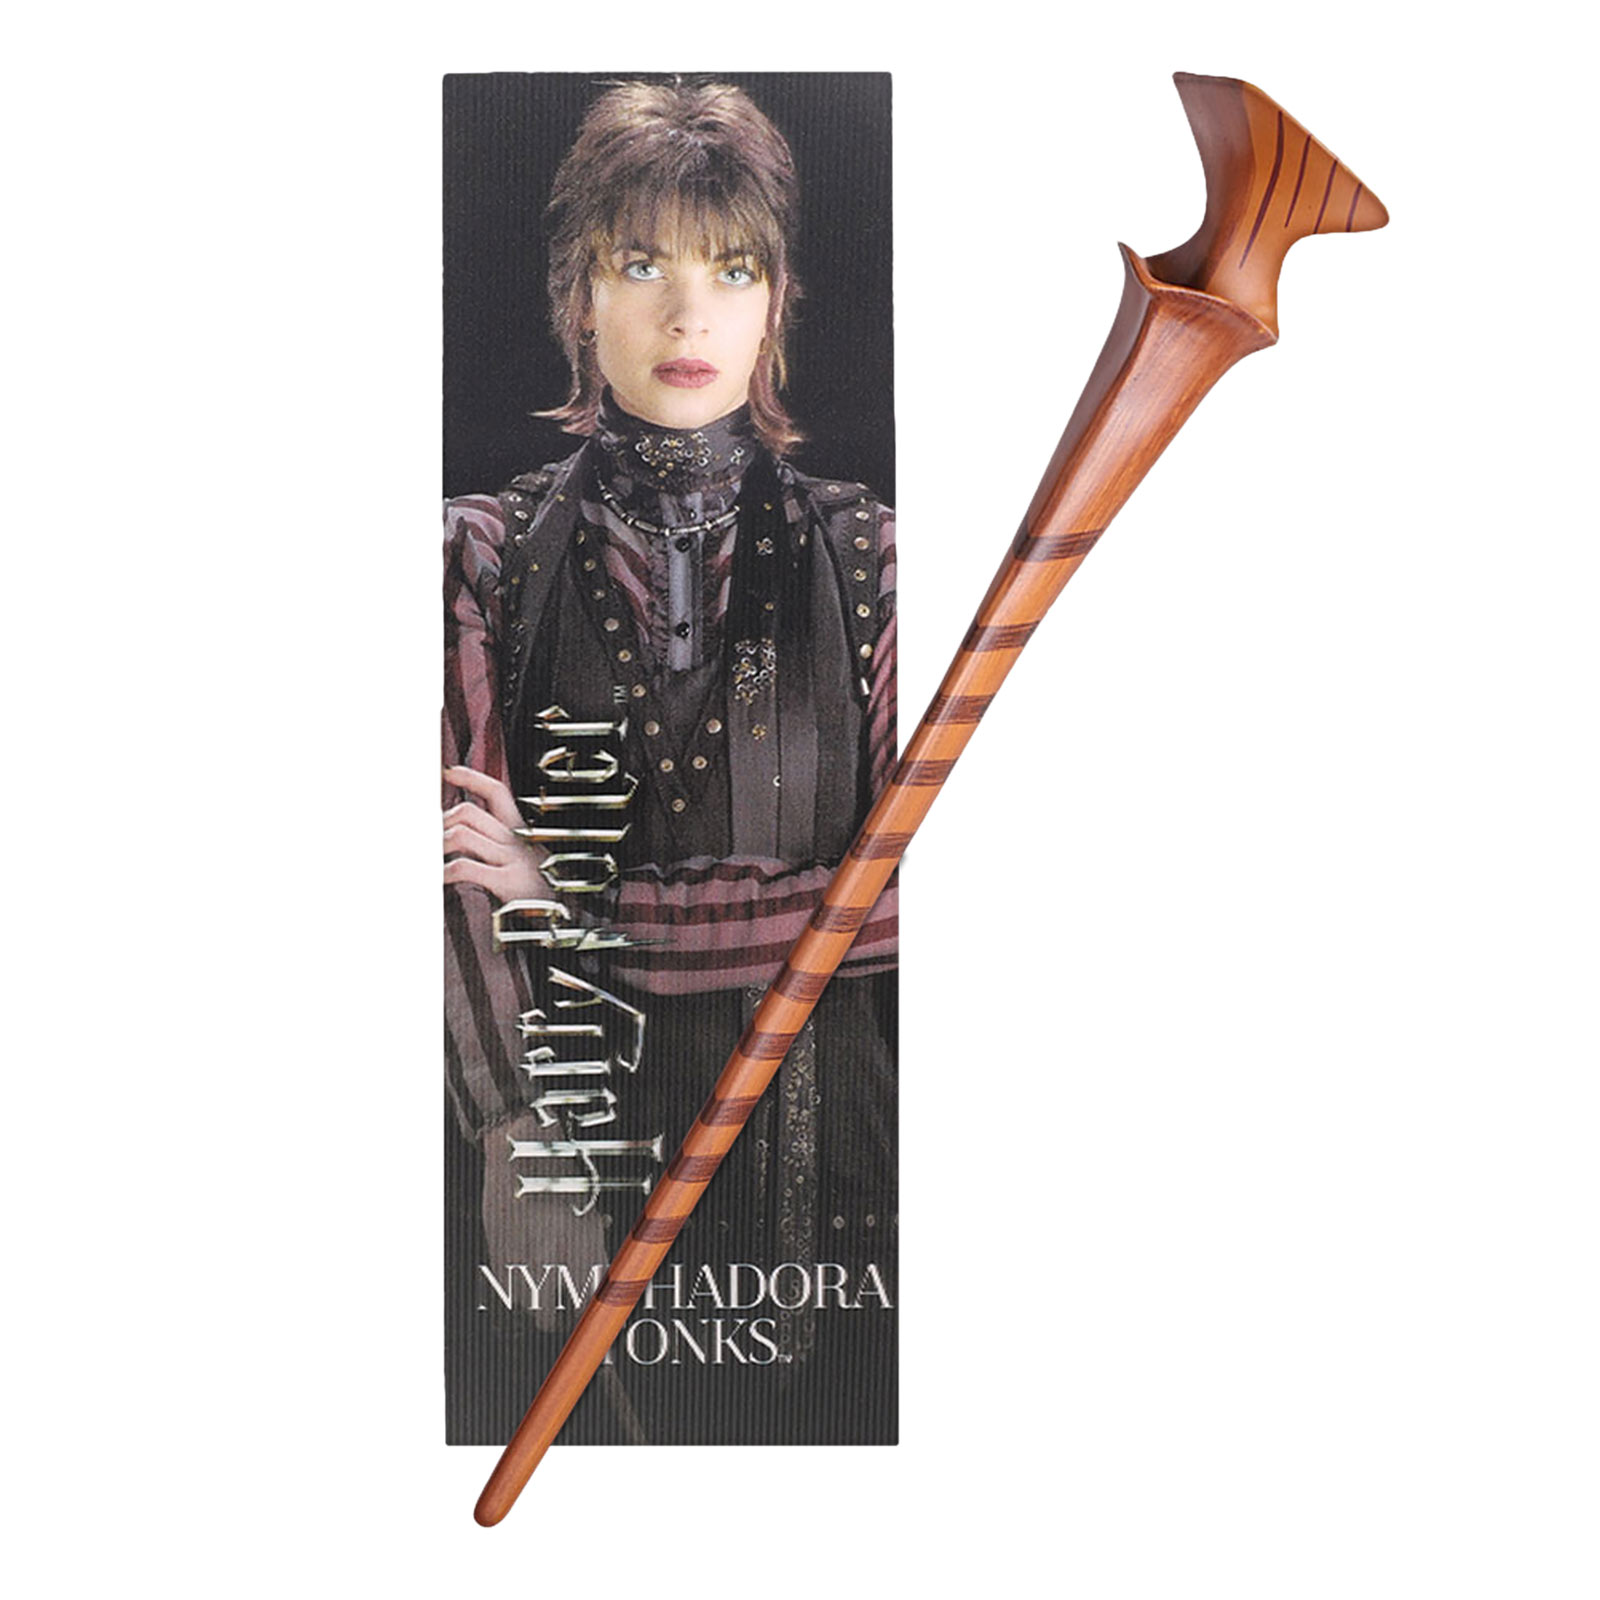 Tonks Magic Wand for Young Wizards with Bookmark - Harry Potter